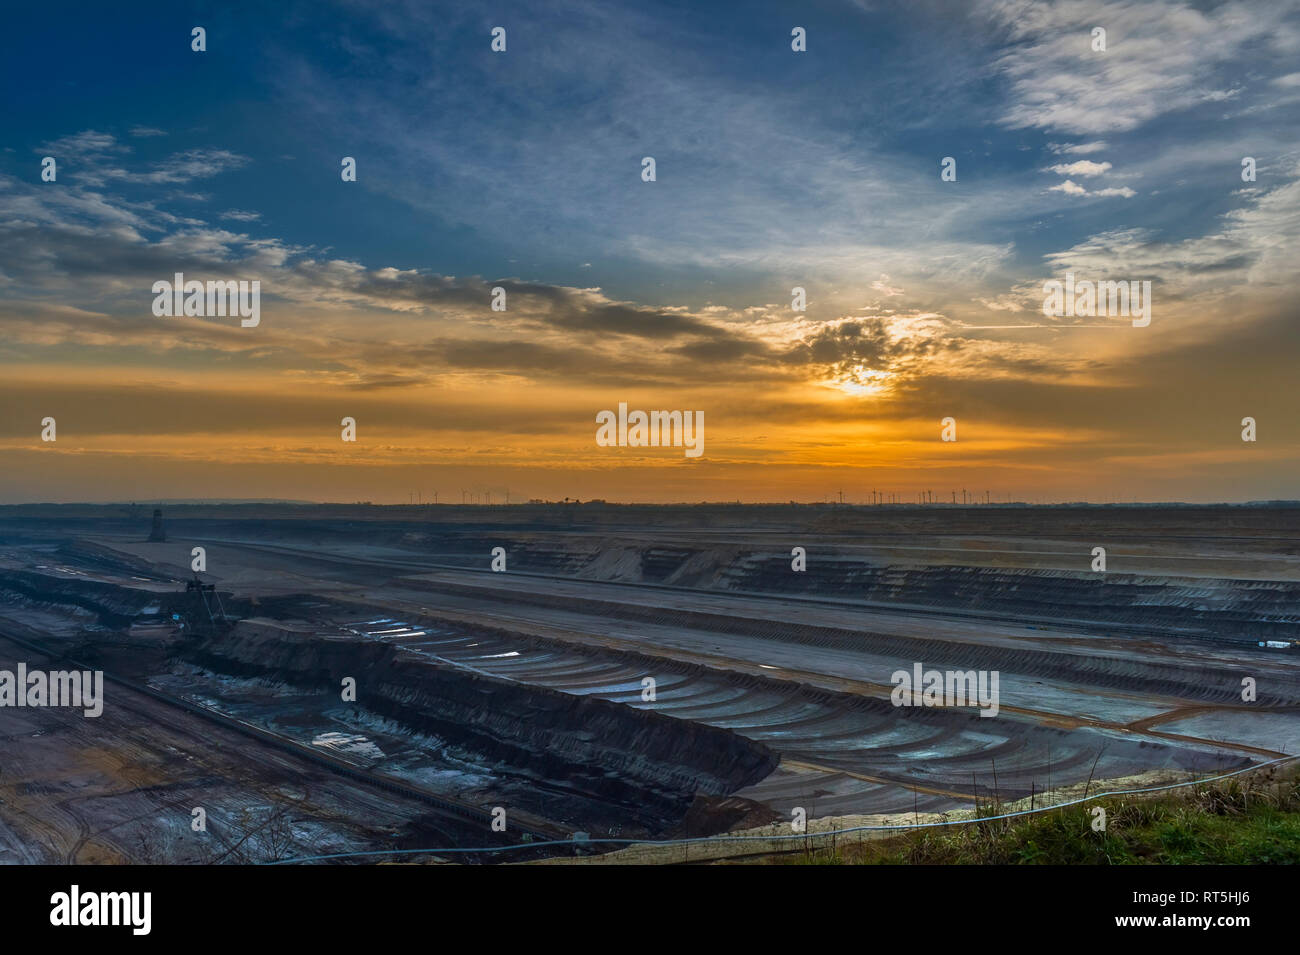 Germany, Grevenbroich, Garzweiler surface mine in winter at sunset Stock Photo